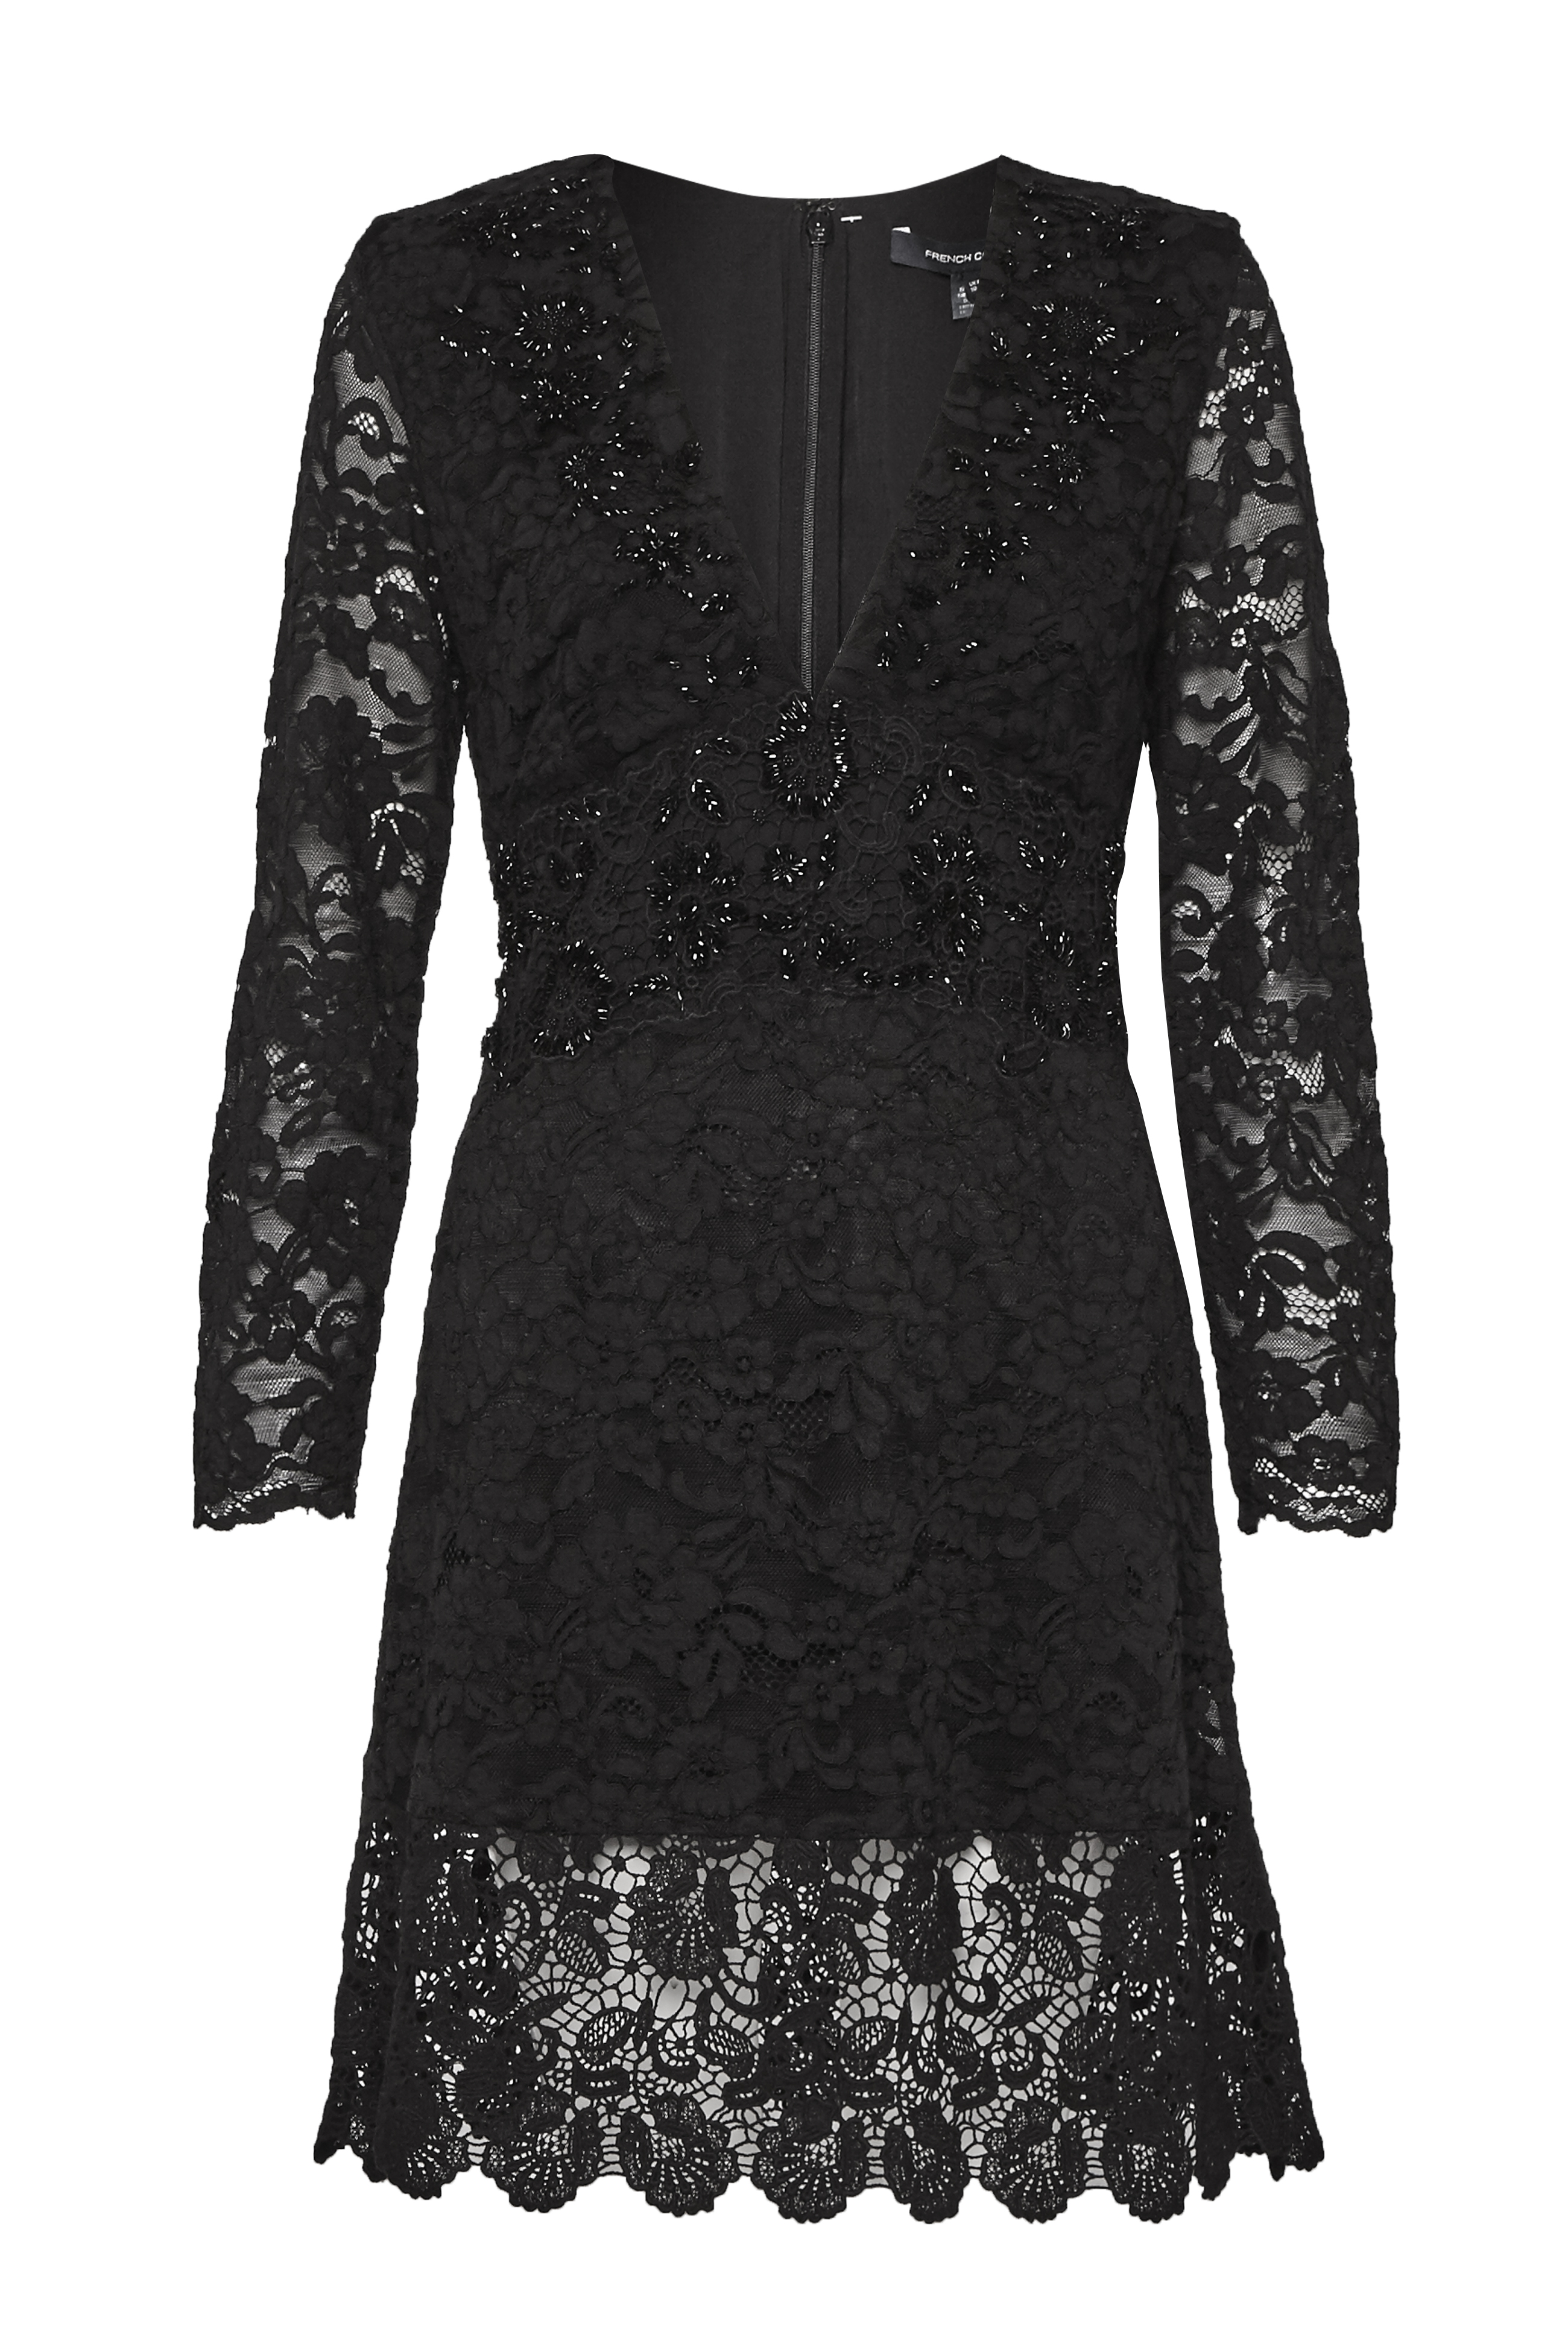 french_connection_aw16__emmie_lace_ls_vnk_dress_a%cc%82180_71gbt_blk_5